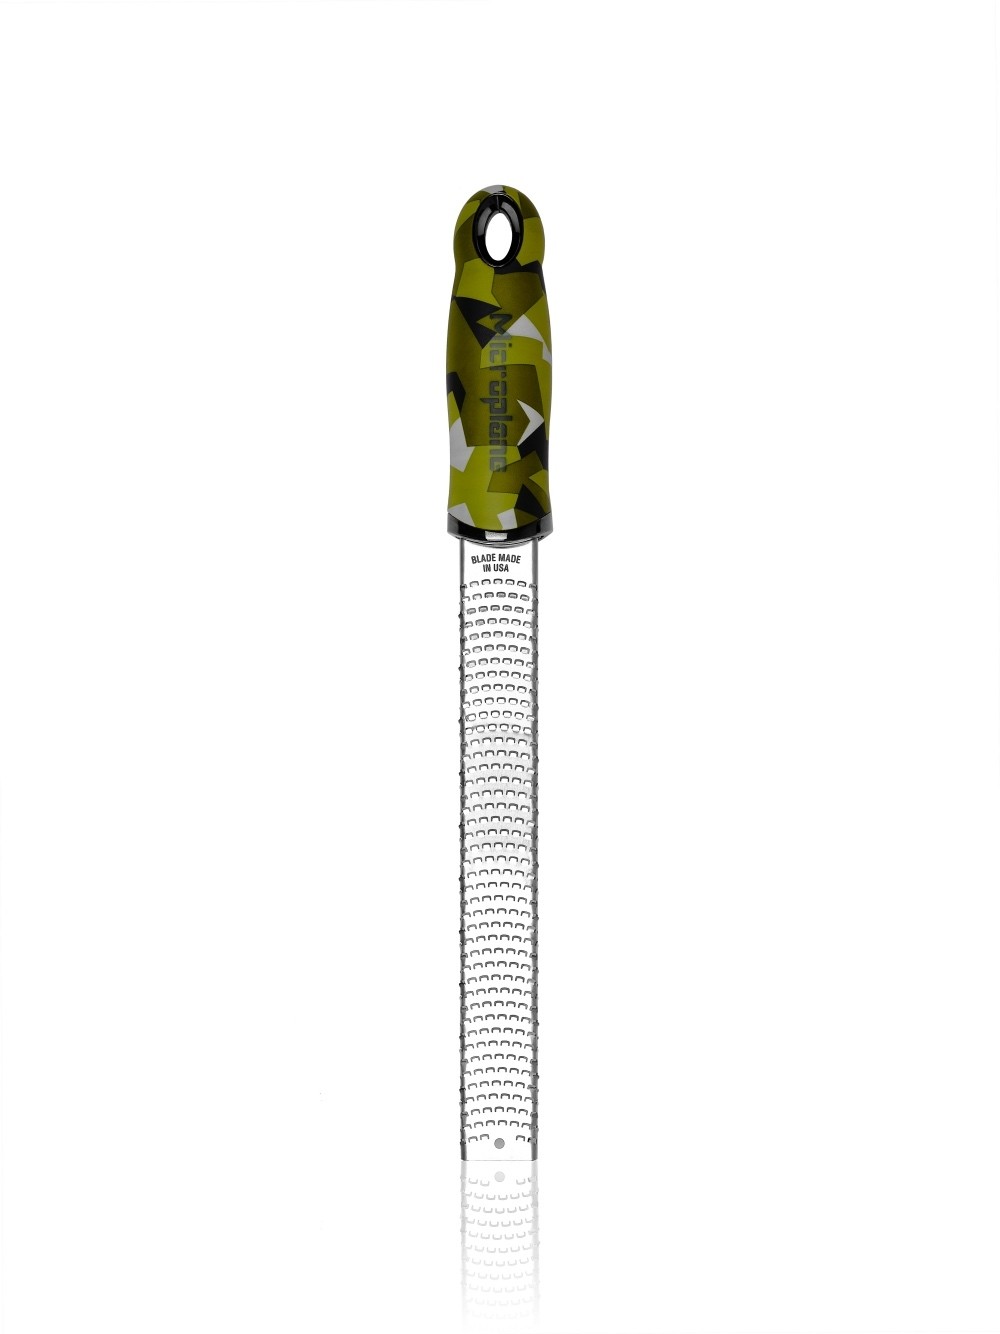 Microplane PREMIUM CLASSIC Zester Reibe FUNKY Camouflage